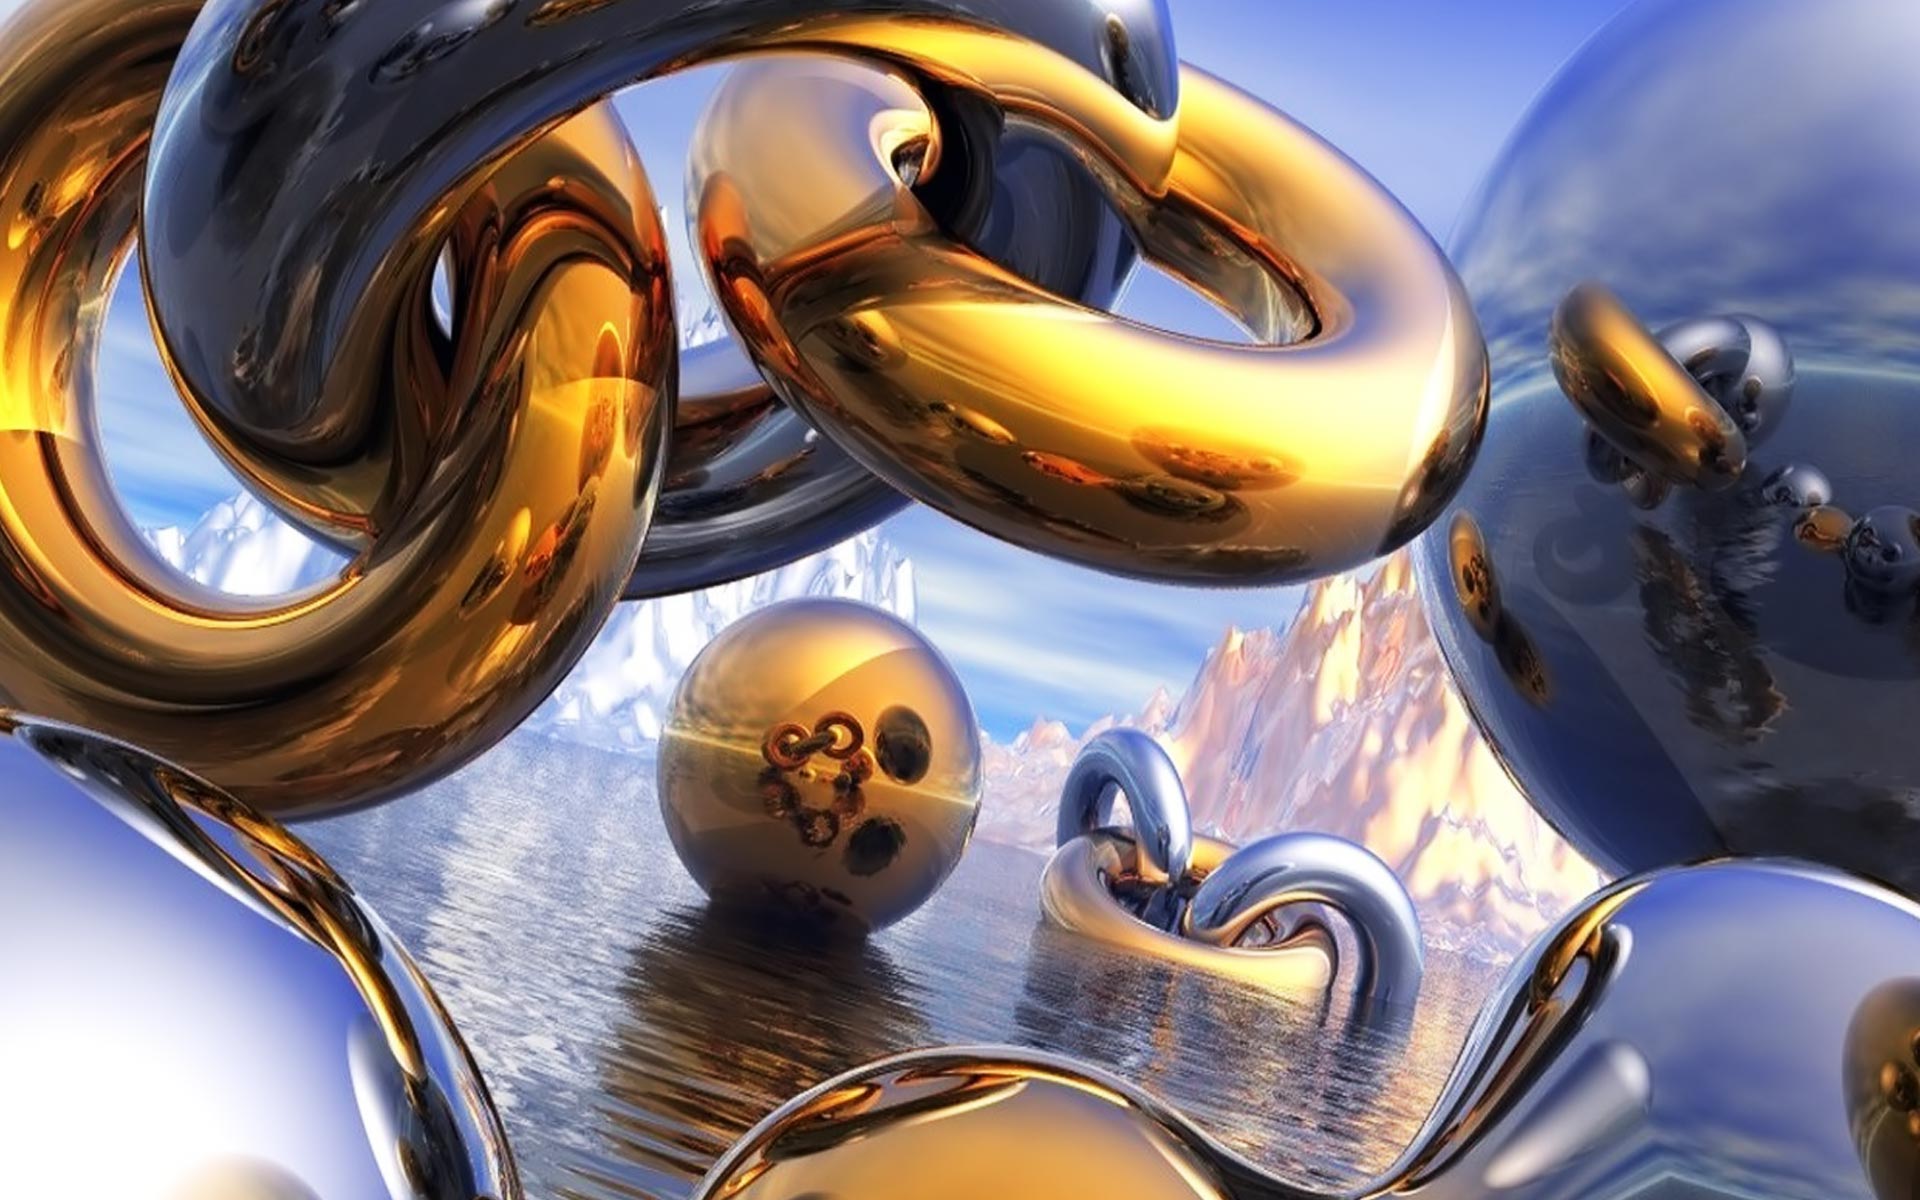 3d, metal, sphere, abstract, gold, water, cgi